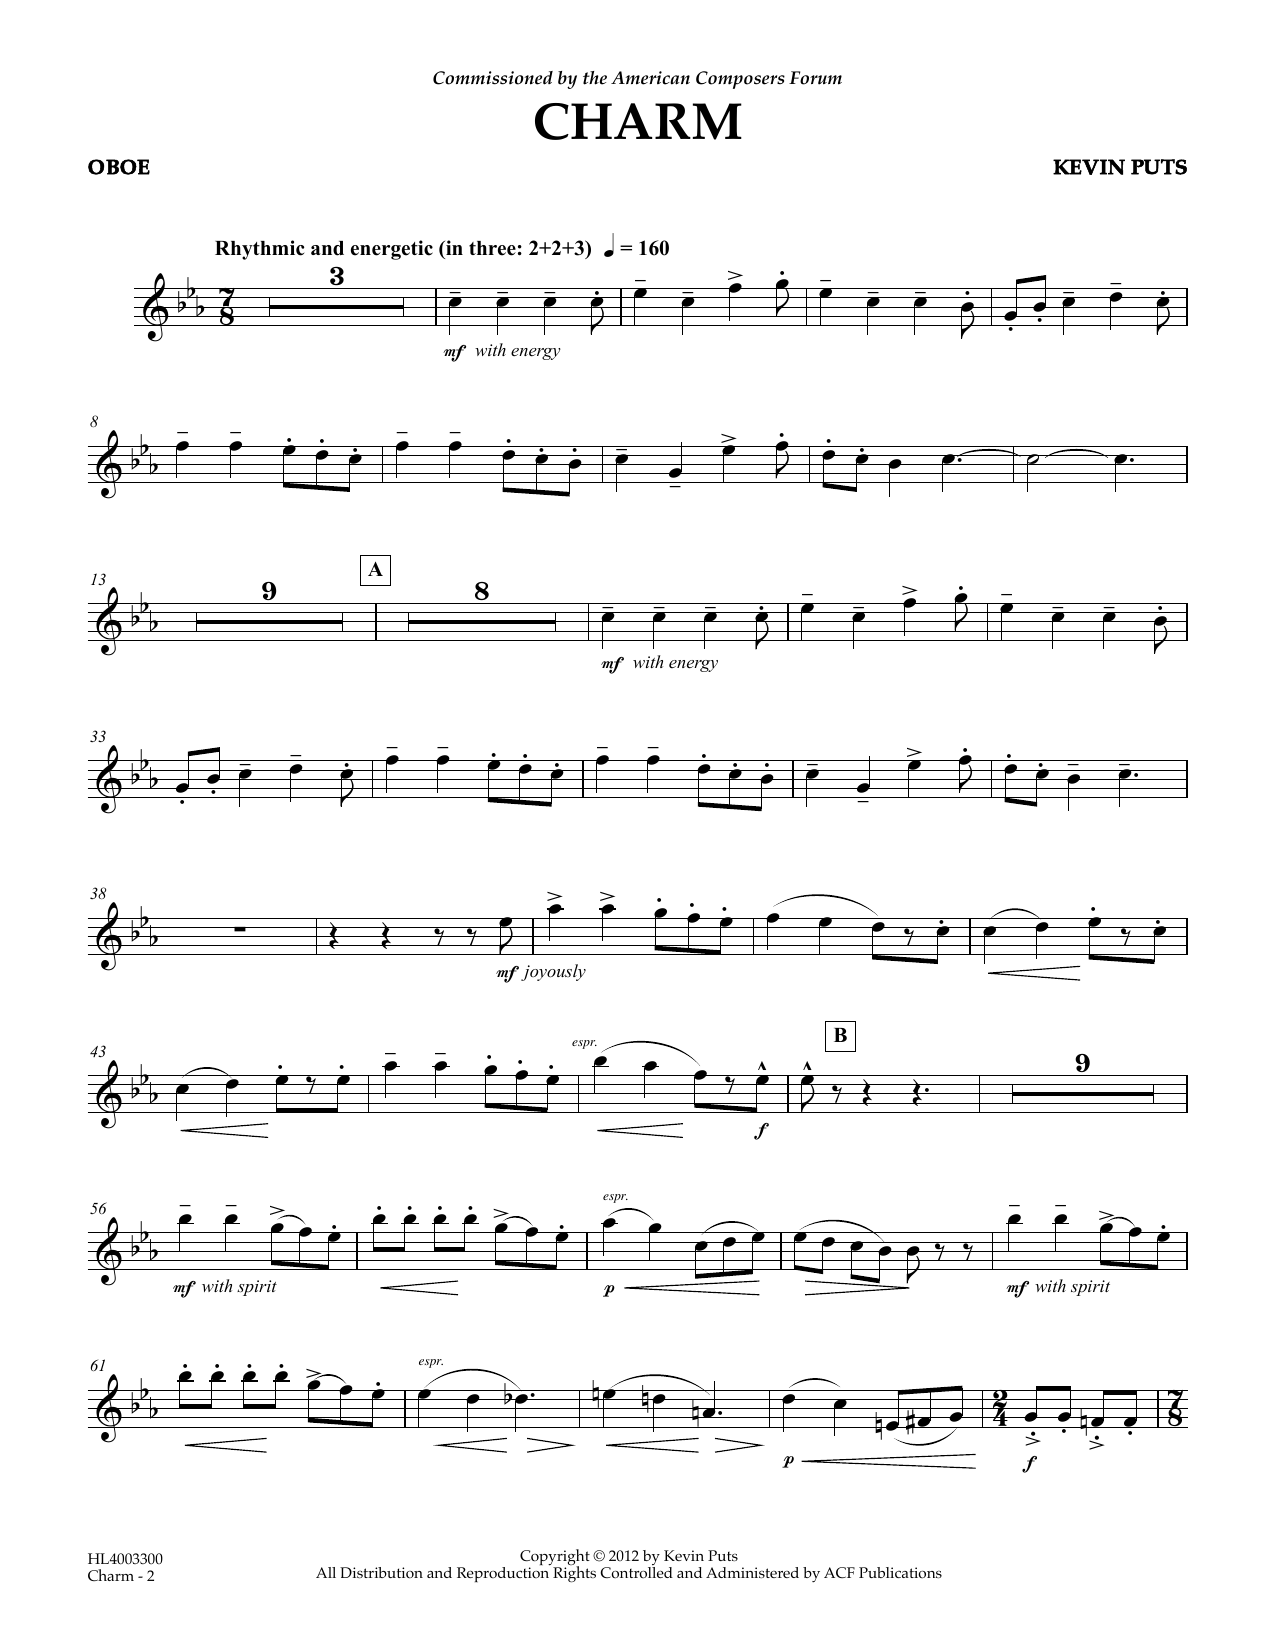 Download Kevin Puts Charm - Oboe Sheet Music